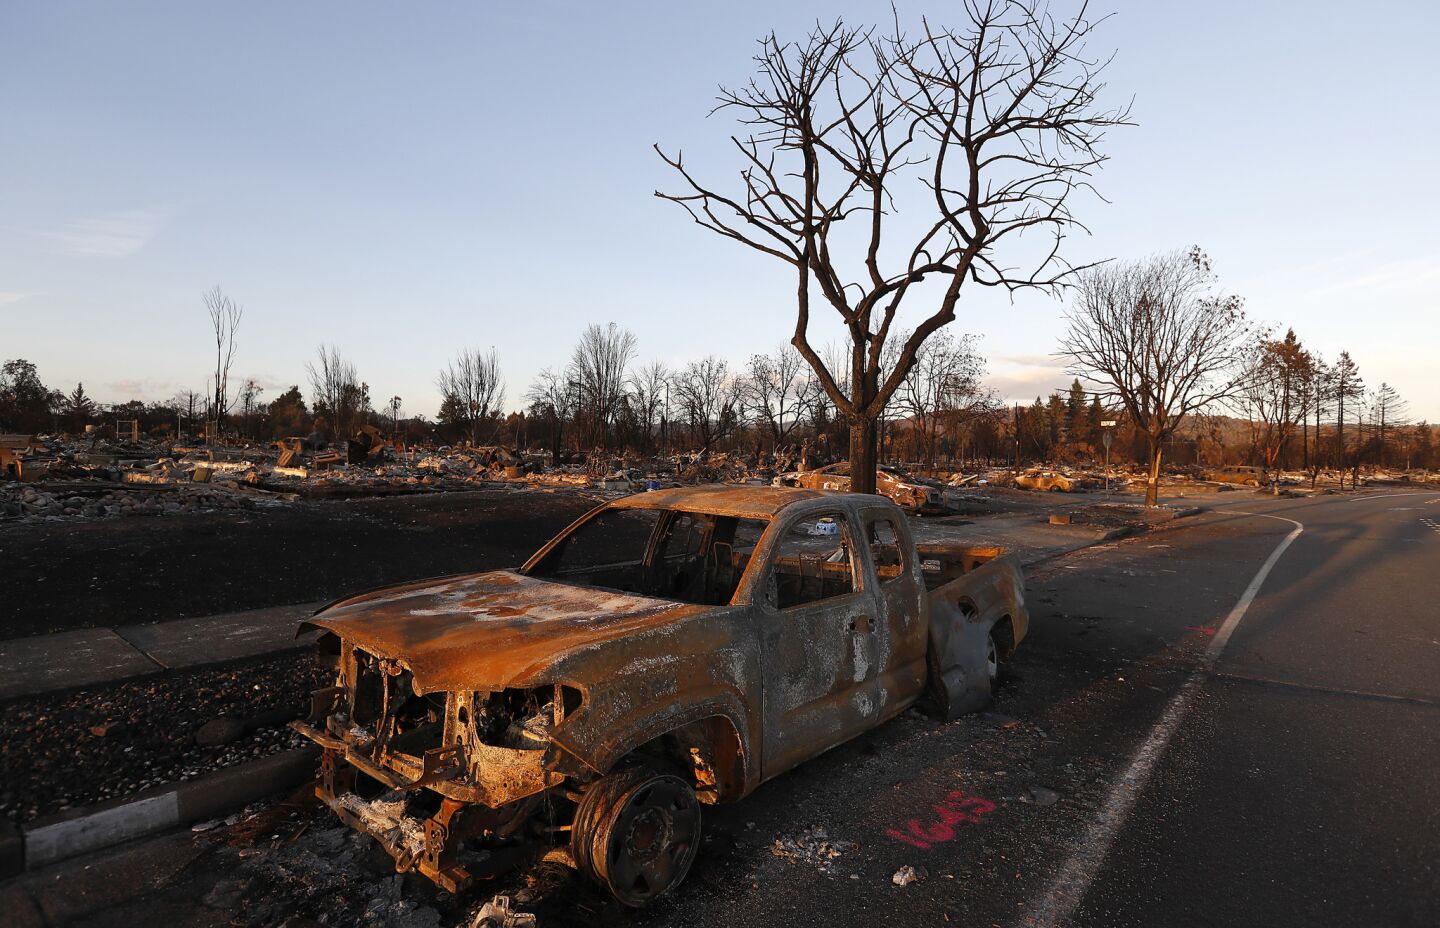 Burned vehicles litter the landscape in Coffey Park. The neighborhood was completely destroyed by the Tubbs fire 11 days ago, with many residents fleeing in haste as their homes were enveloped in flames.